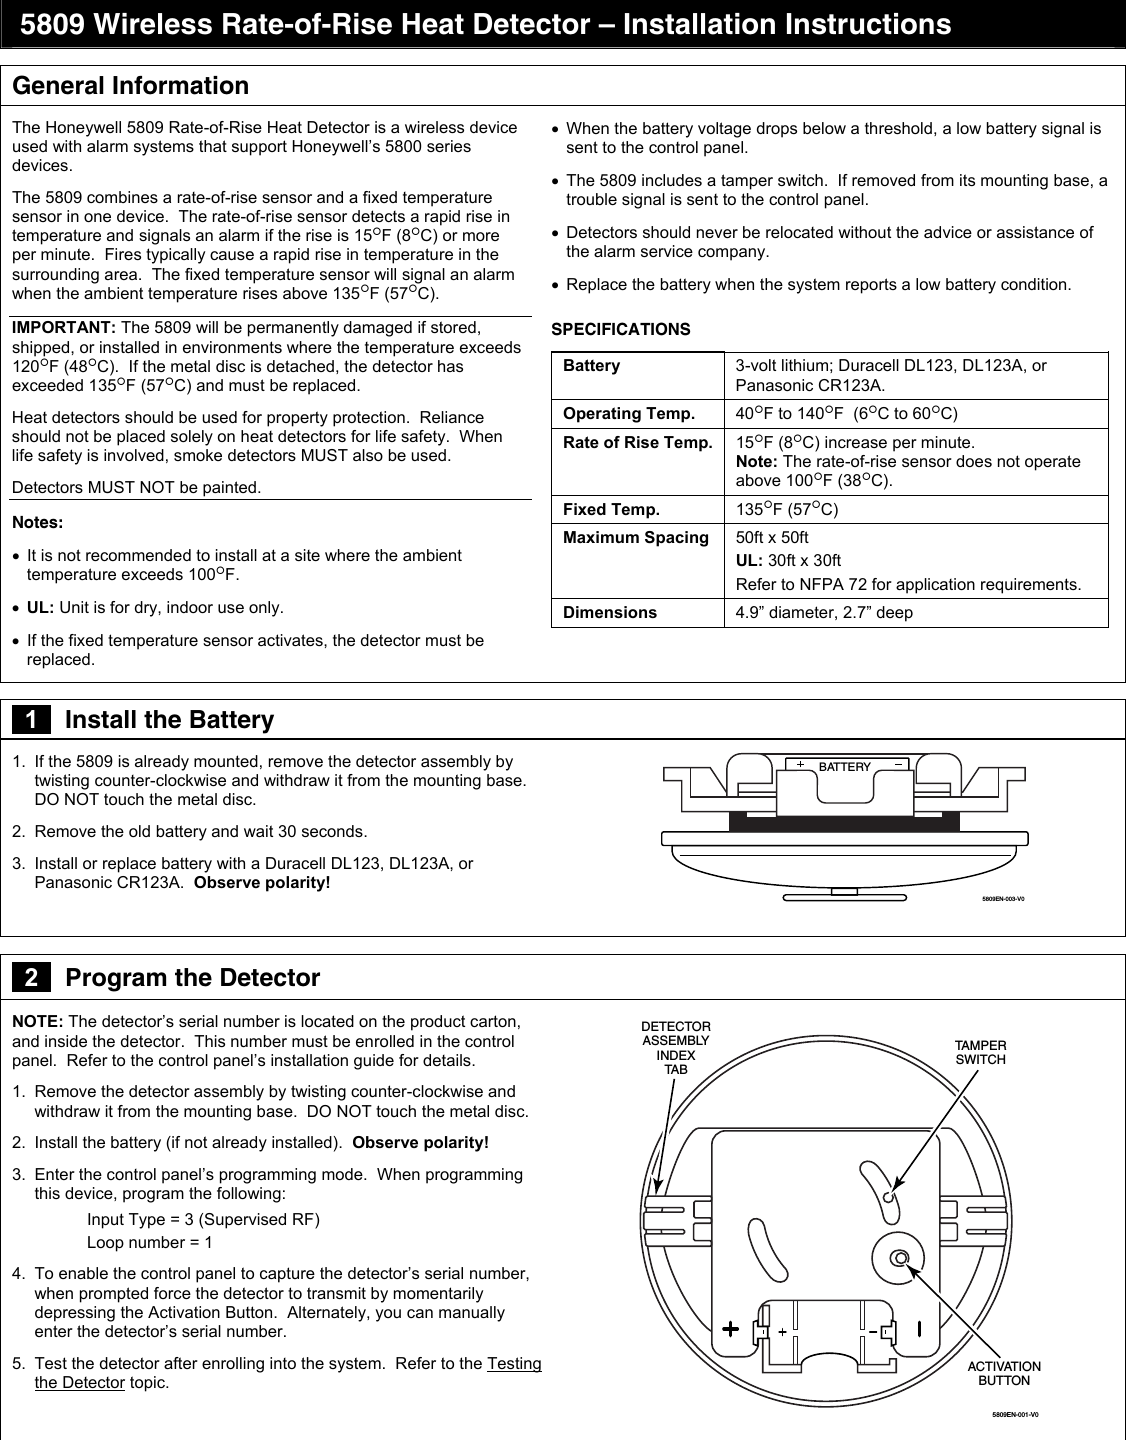  5809 Wireless Rate-of-Rise Heat Detector – Installation Instructions  General Information The Honeywell 5809 Rate-of-Rise Heat Detector is a wireless device used with alarm systems that support Honeywell’s 5800 series devices.   The 5809 combines a rate-of-rise sensor and a fixed temperature sensor in one device.  The rate-of-rise sensor detects a rapid rise in temperature and signals an alarm if the rise is 15F (8C) or more per minute.  Fires typically cause a rapid rise in temperature in the surrounding area.  The fixed temperature sensor will signal an alarm when the ambient temperature rises above 135F (57C). IMPORTANT: The 5809 will be permanently damaged if stored, shipped, or installed in environments where the temperature exceeds 120F (48C).  If the metal disc is detached, the detector has exceeded 135F (57C) and must be replaced.  Heat detectors should be used for property protection.  Reliance should not be placed solely on heat detectors for life safety.  When life safety is involved, smoke detectors MUST also be used. Detectors MUST NOT be painted. Notes:   It is not recommended to install at a site where the ambient temperature exceeds 100F.  UL: Unit is for dry, indoor use only.   If the fixed temperature sensor activates, the detector must be replaced.   When the battery voltage drops below a threshold, a low battery signal is sent to the control panel.    The 5809 includes a tamper switch.  If removed from its mounting base, a trouble signal is sent to the control panel.   Detectors should never be relocated without the advice or assistance of the alarm service company.   Replace the battery when the system reports a low battery condition. SPECIFICATIONS Battery  3-volt lithium; Duracell DL123, DL123A, or Panasonic CR123A. Operating Temp.  40F to 140F  (6C to 60C) Rate of Rise Temp.  15F (8C) increase per minute.   Note: The rate-of-rise sensor does not operate above 100F (38C). Fixed Temp.  135F (57C) Maximum Spacing  50ft x 50ft   UL: 30ft x 30ft Refer to NFPA 72 for application requirements. Dimensions  4.9” diameter, 2.7” deep  zzz    1   Install the Battery 1.  If the 5809 is already mounted, remove the detector assembly by twisting counter-clockwise and withdraw it from the mounting base.  DO NOT touch the metal disc. 2.  Remove the old battery and wait 30 seconds. 3.  Install or replace battery with a Duracell DL123, DL123A, or Panasonic CR123A.  Observe polarity!  BATTERY5809EN-003-V0   2   Program the Detector NOTE: The detector’s serial number is located on the product carton, and inside the detector.  This number must be enrolled in the control panel.  Refer to the control panel’s installation guide for details. 1.  Remove the detector assembly by twisting counter-clockwise and withdraw it from the mounting base.  DO NOT touch the metal disc. 2.  Install the battery (if not already installed).  Observe polarity! 3.  Enter the control panel’s programming mode.  When programming this device, program the following:   Input Type = 3 (Supervised RF) Loop number = 1 4.  To enable the control panel to capture the detector’s serial number, when prompted force the detector to transmit by momentarily depressing the Activation Button.  Alternately, you can manually enter the detector’s serial number.  5.  Test the detector after enrolling into the system.  Refer to the Testing the Detector topic.   5809EN-001-V0ACTIVATIONBUTTONDETECTORASSEMBLYINDEXTA BTAMPERSWITCH   